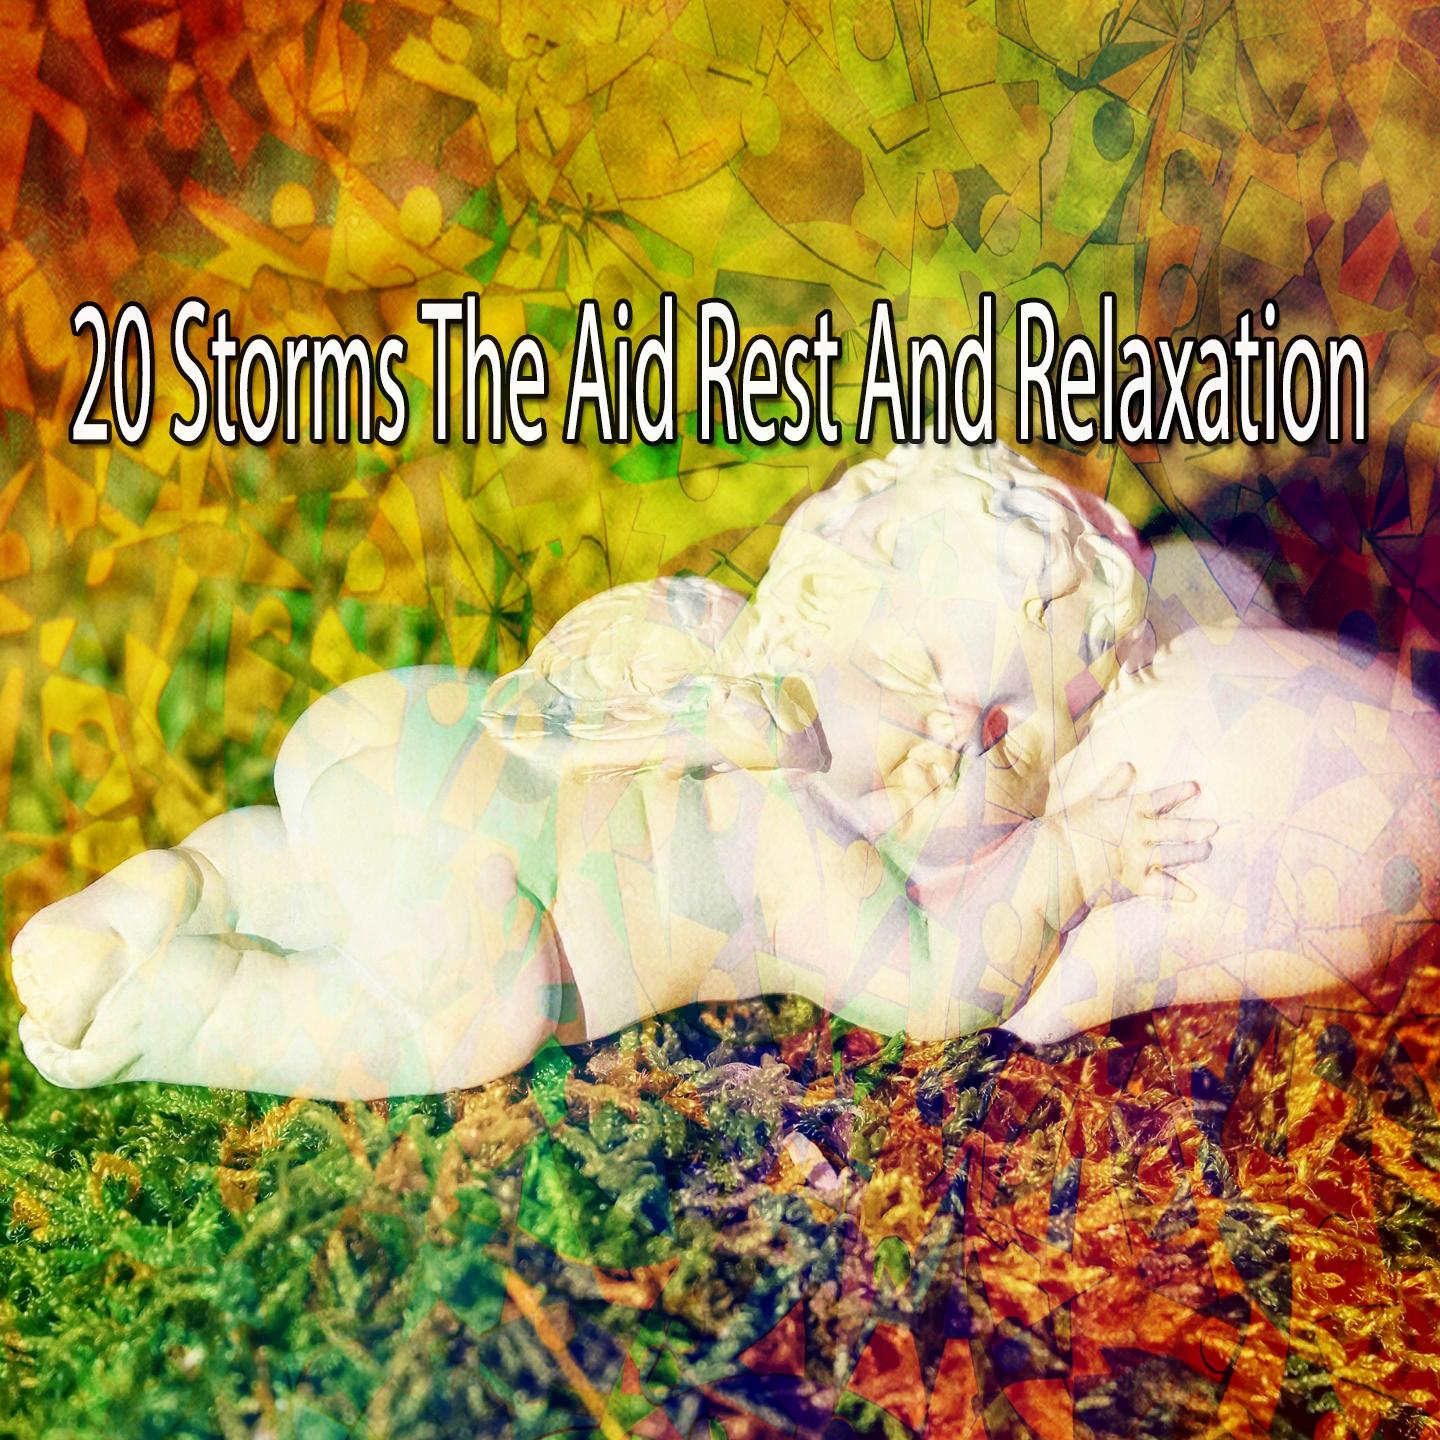 20 Storms the Aid Rest and Relaxation